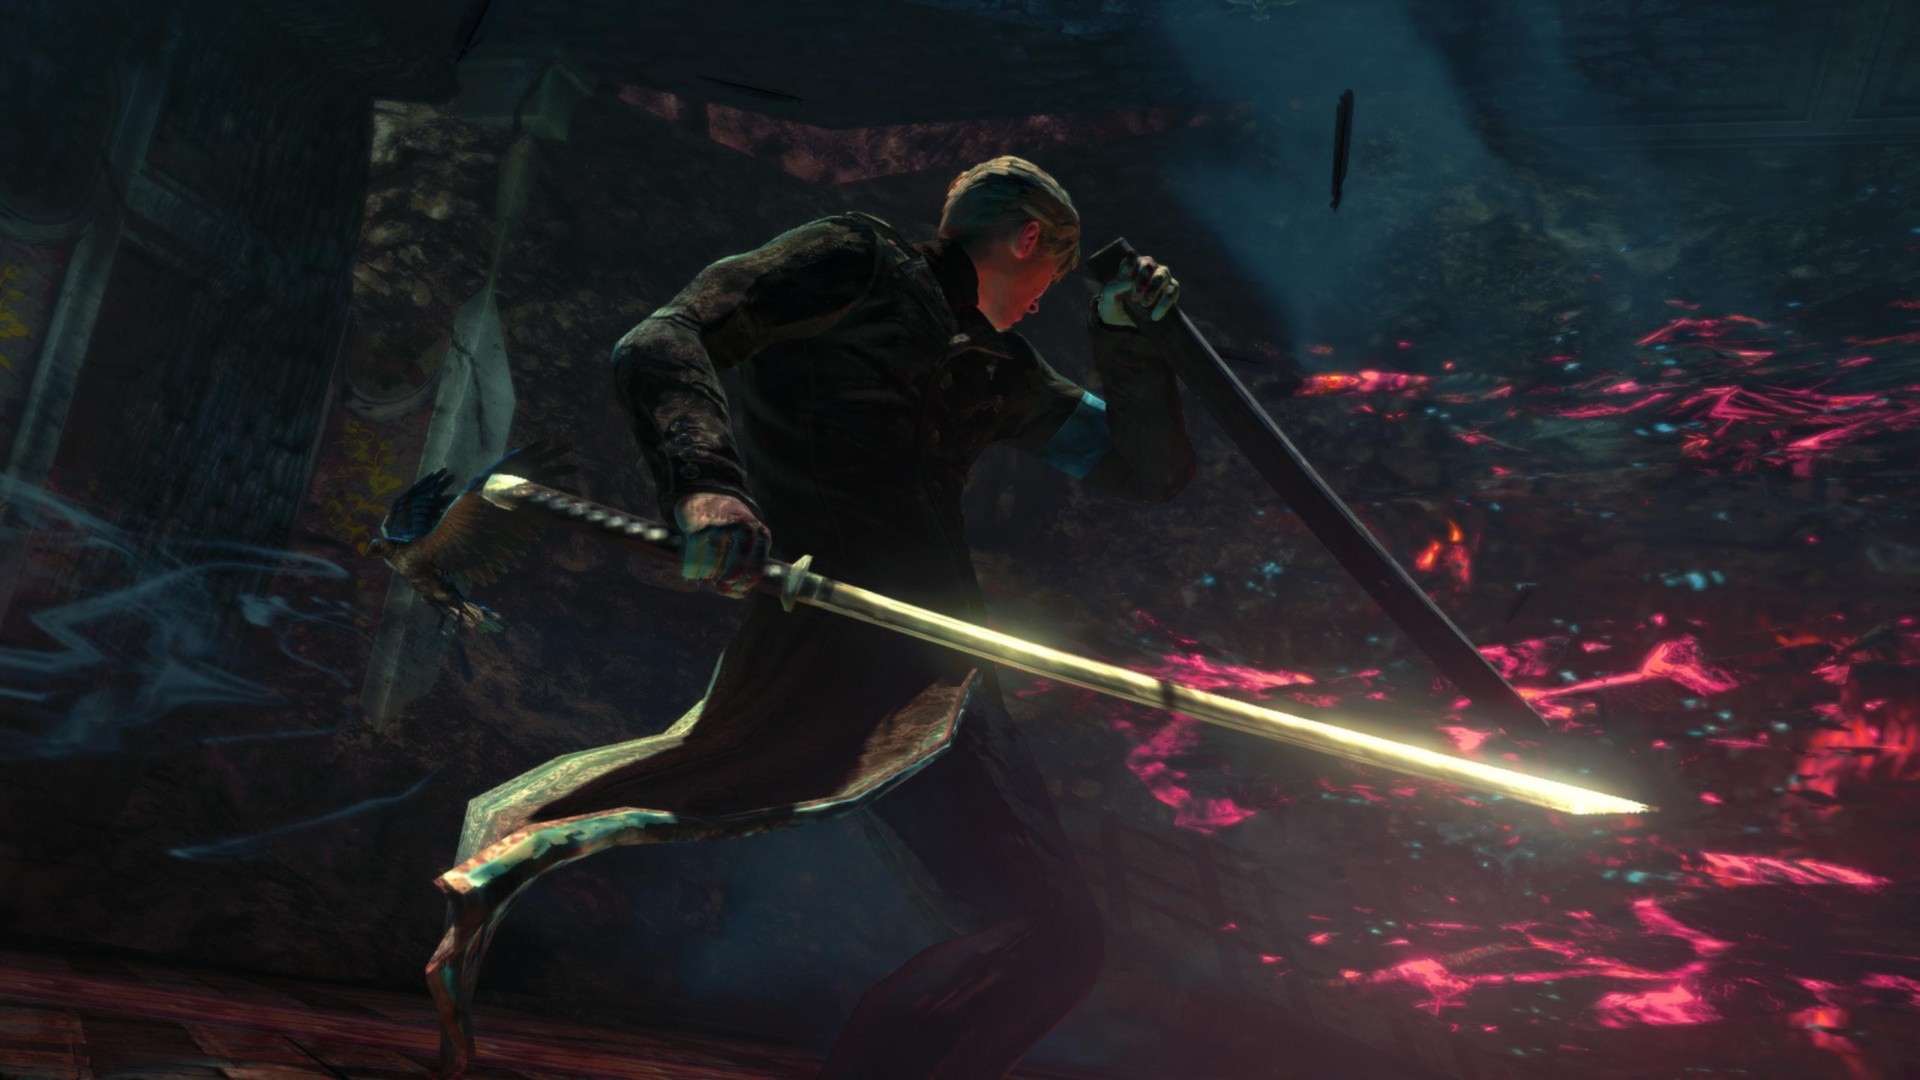 DmC: Devil May Cry - Vergil's Downfall Review - GameSpot